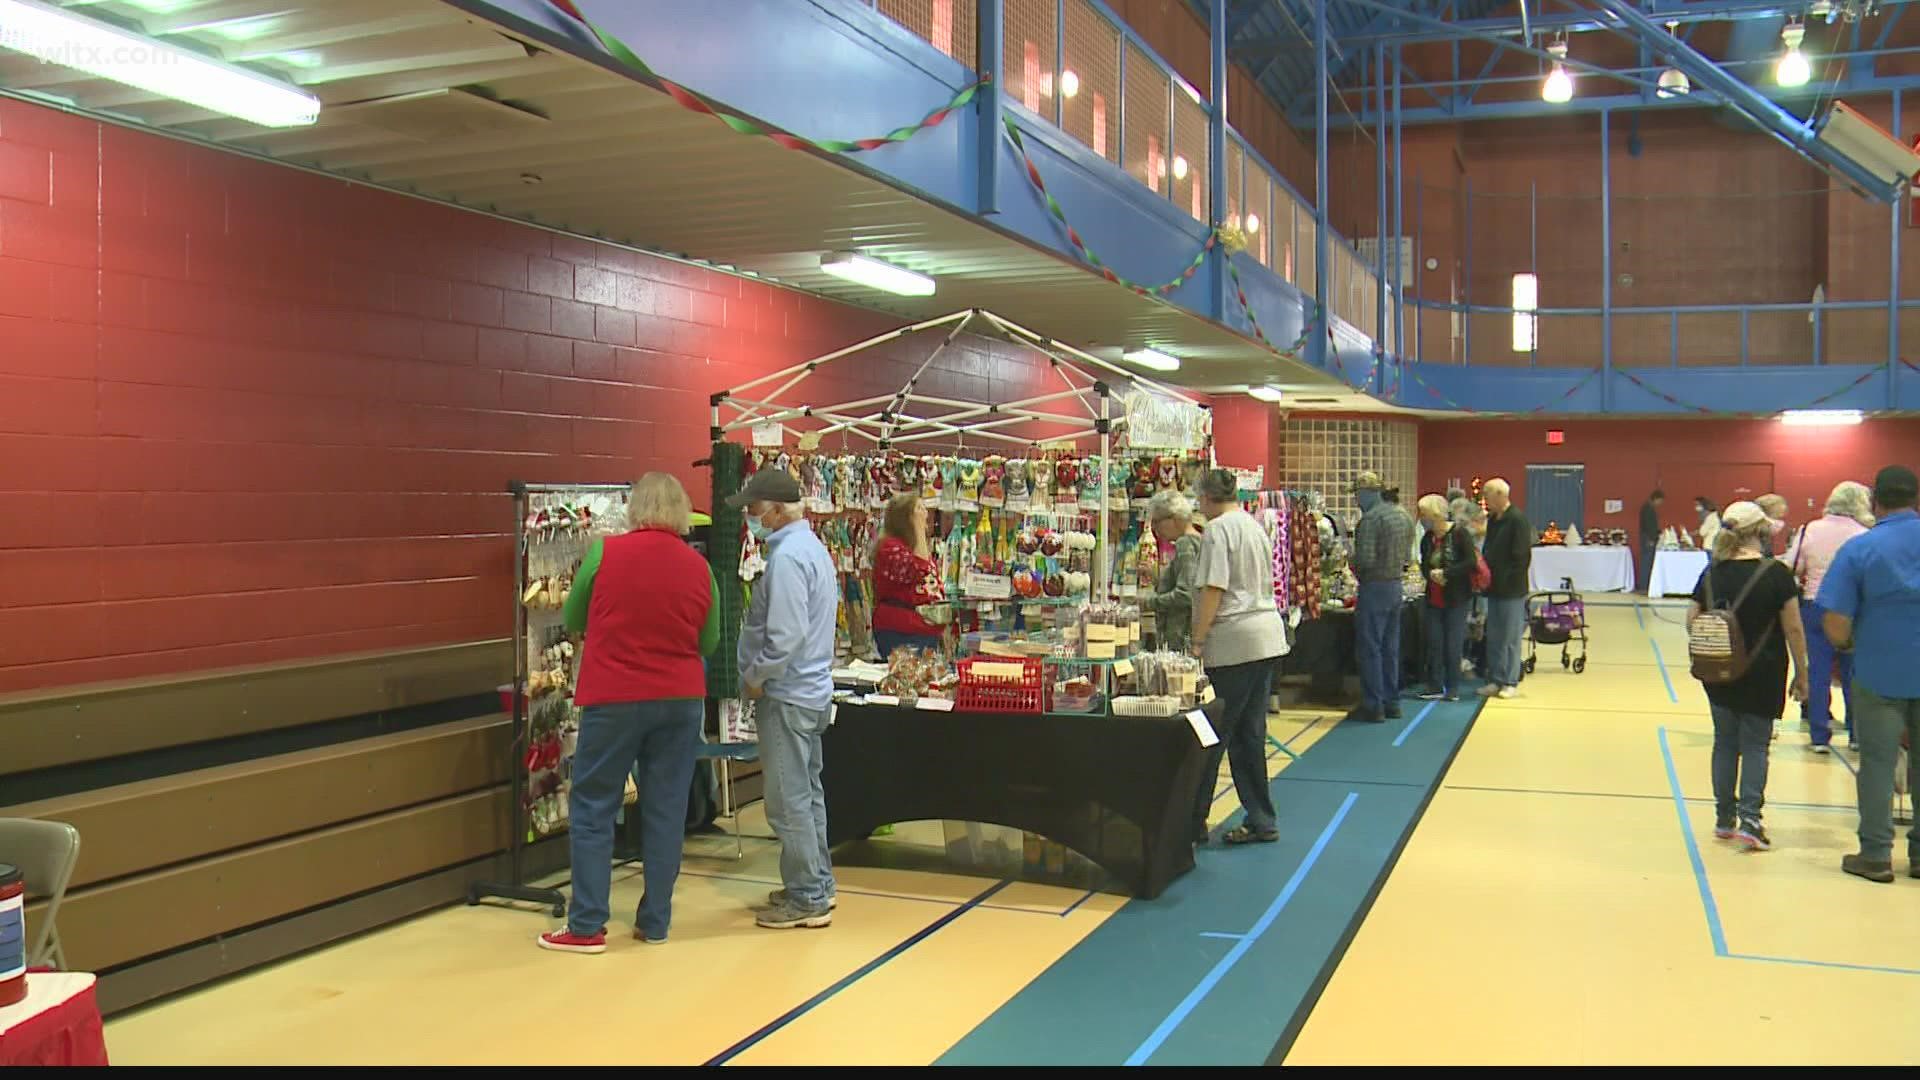 The Christmas Peddler returns to West Columbia